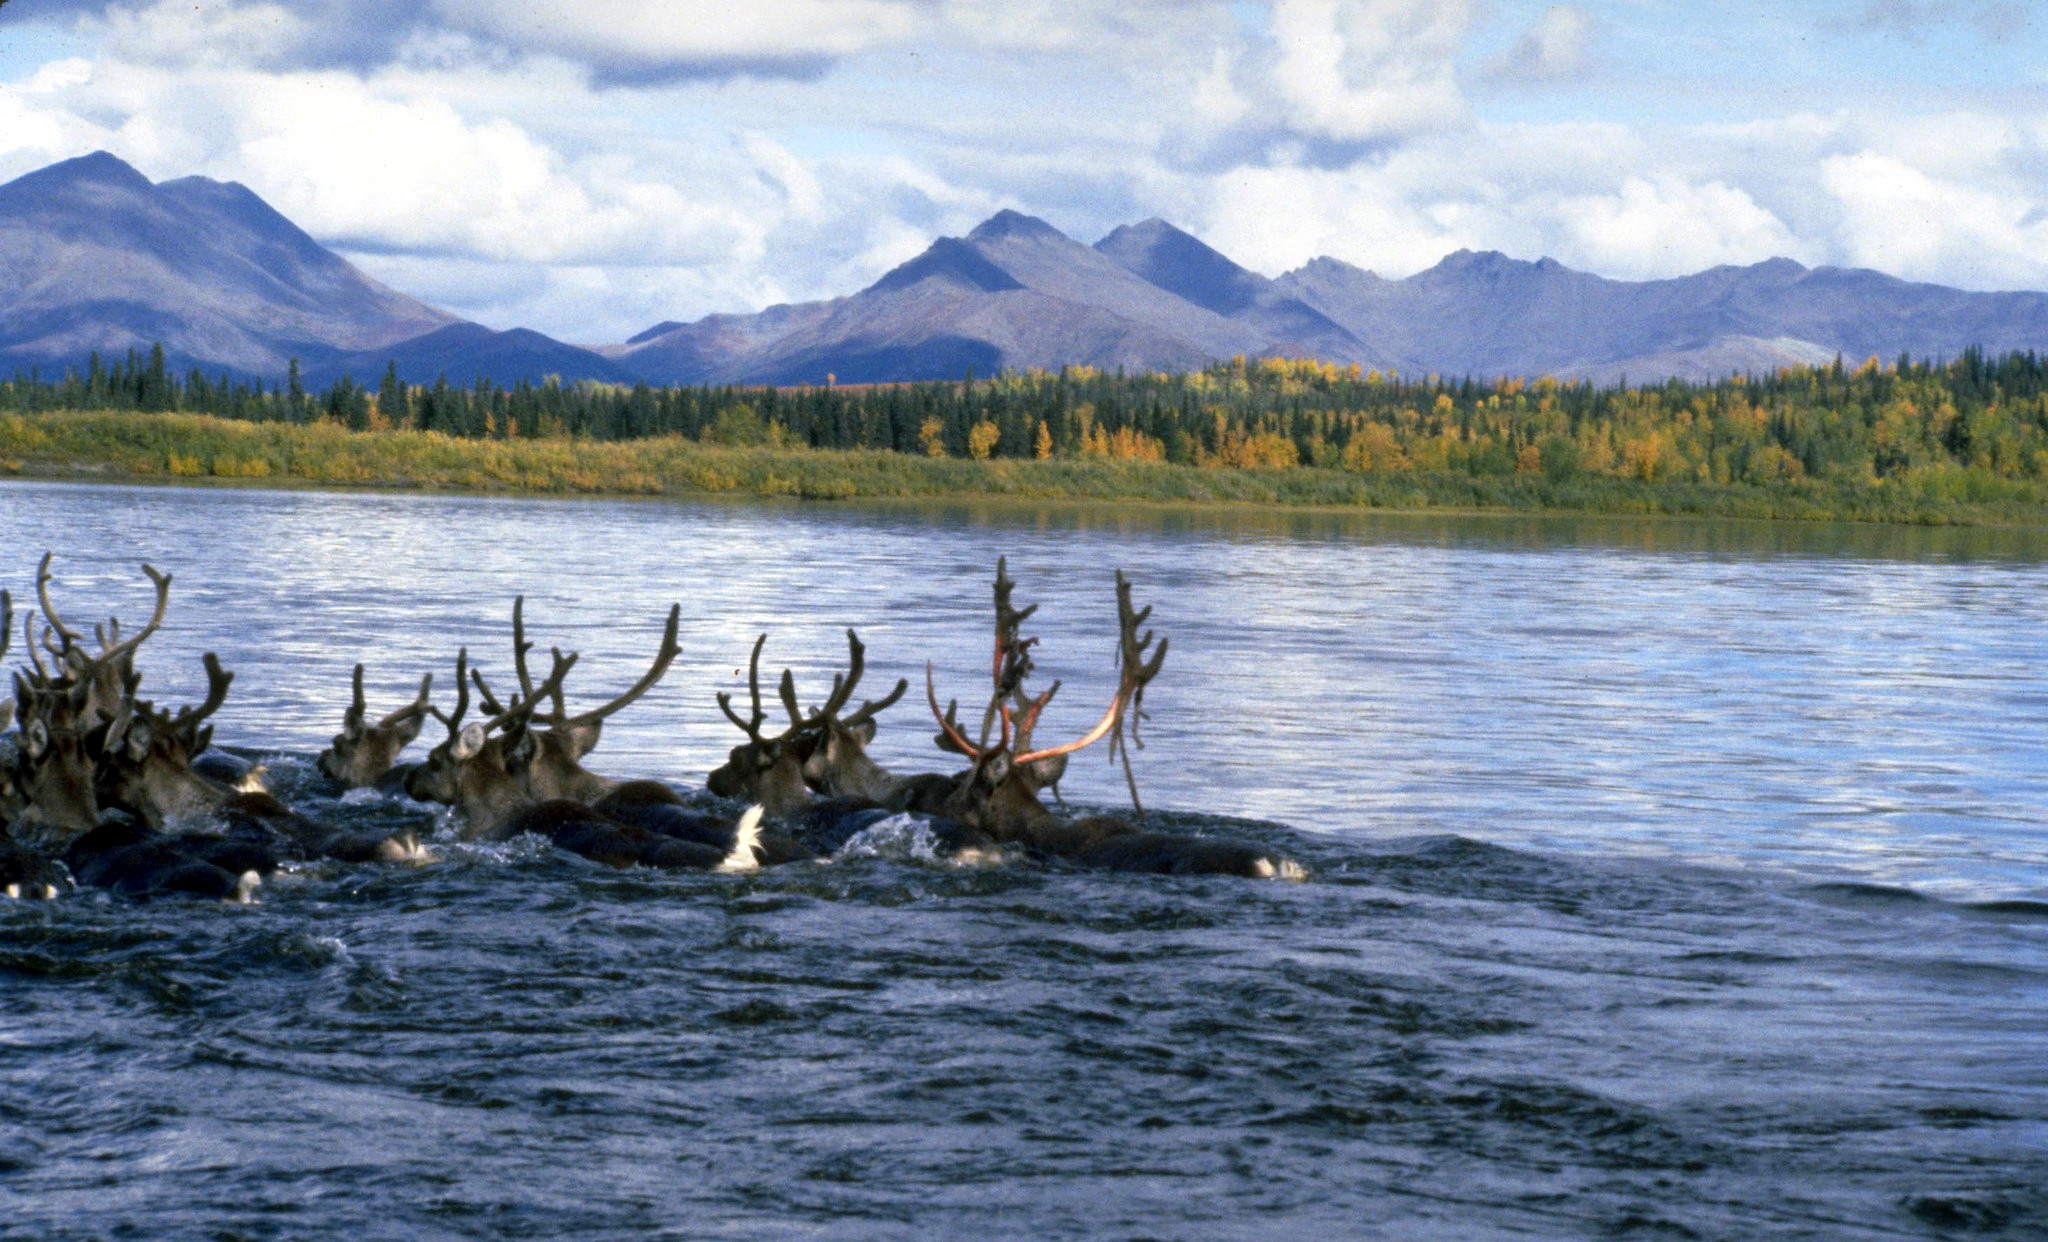 A small group of caribou swim across a wide river with a forest and mountains on the far bank.